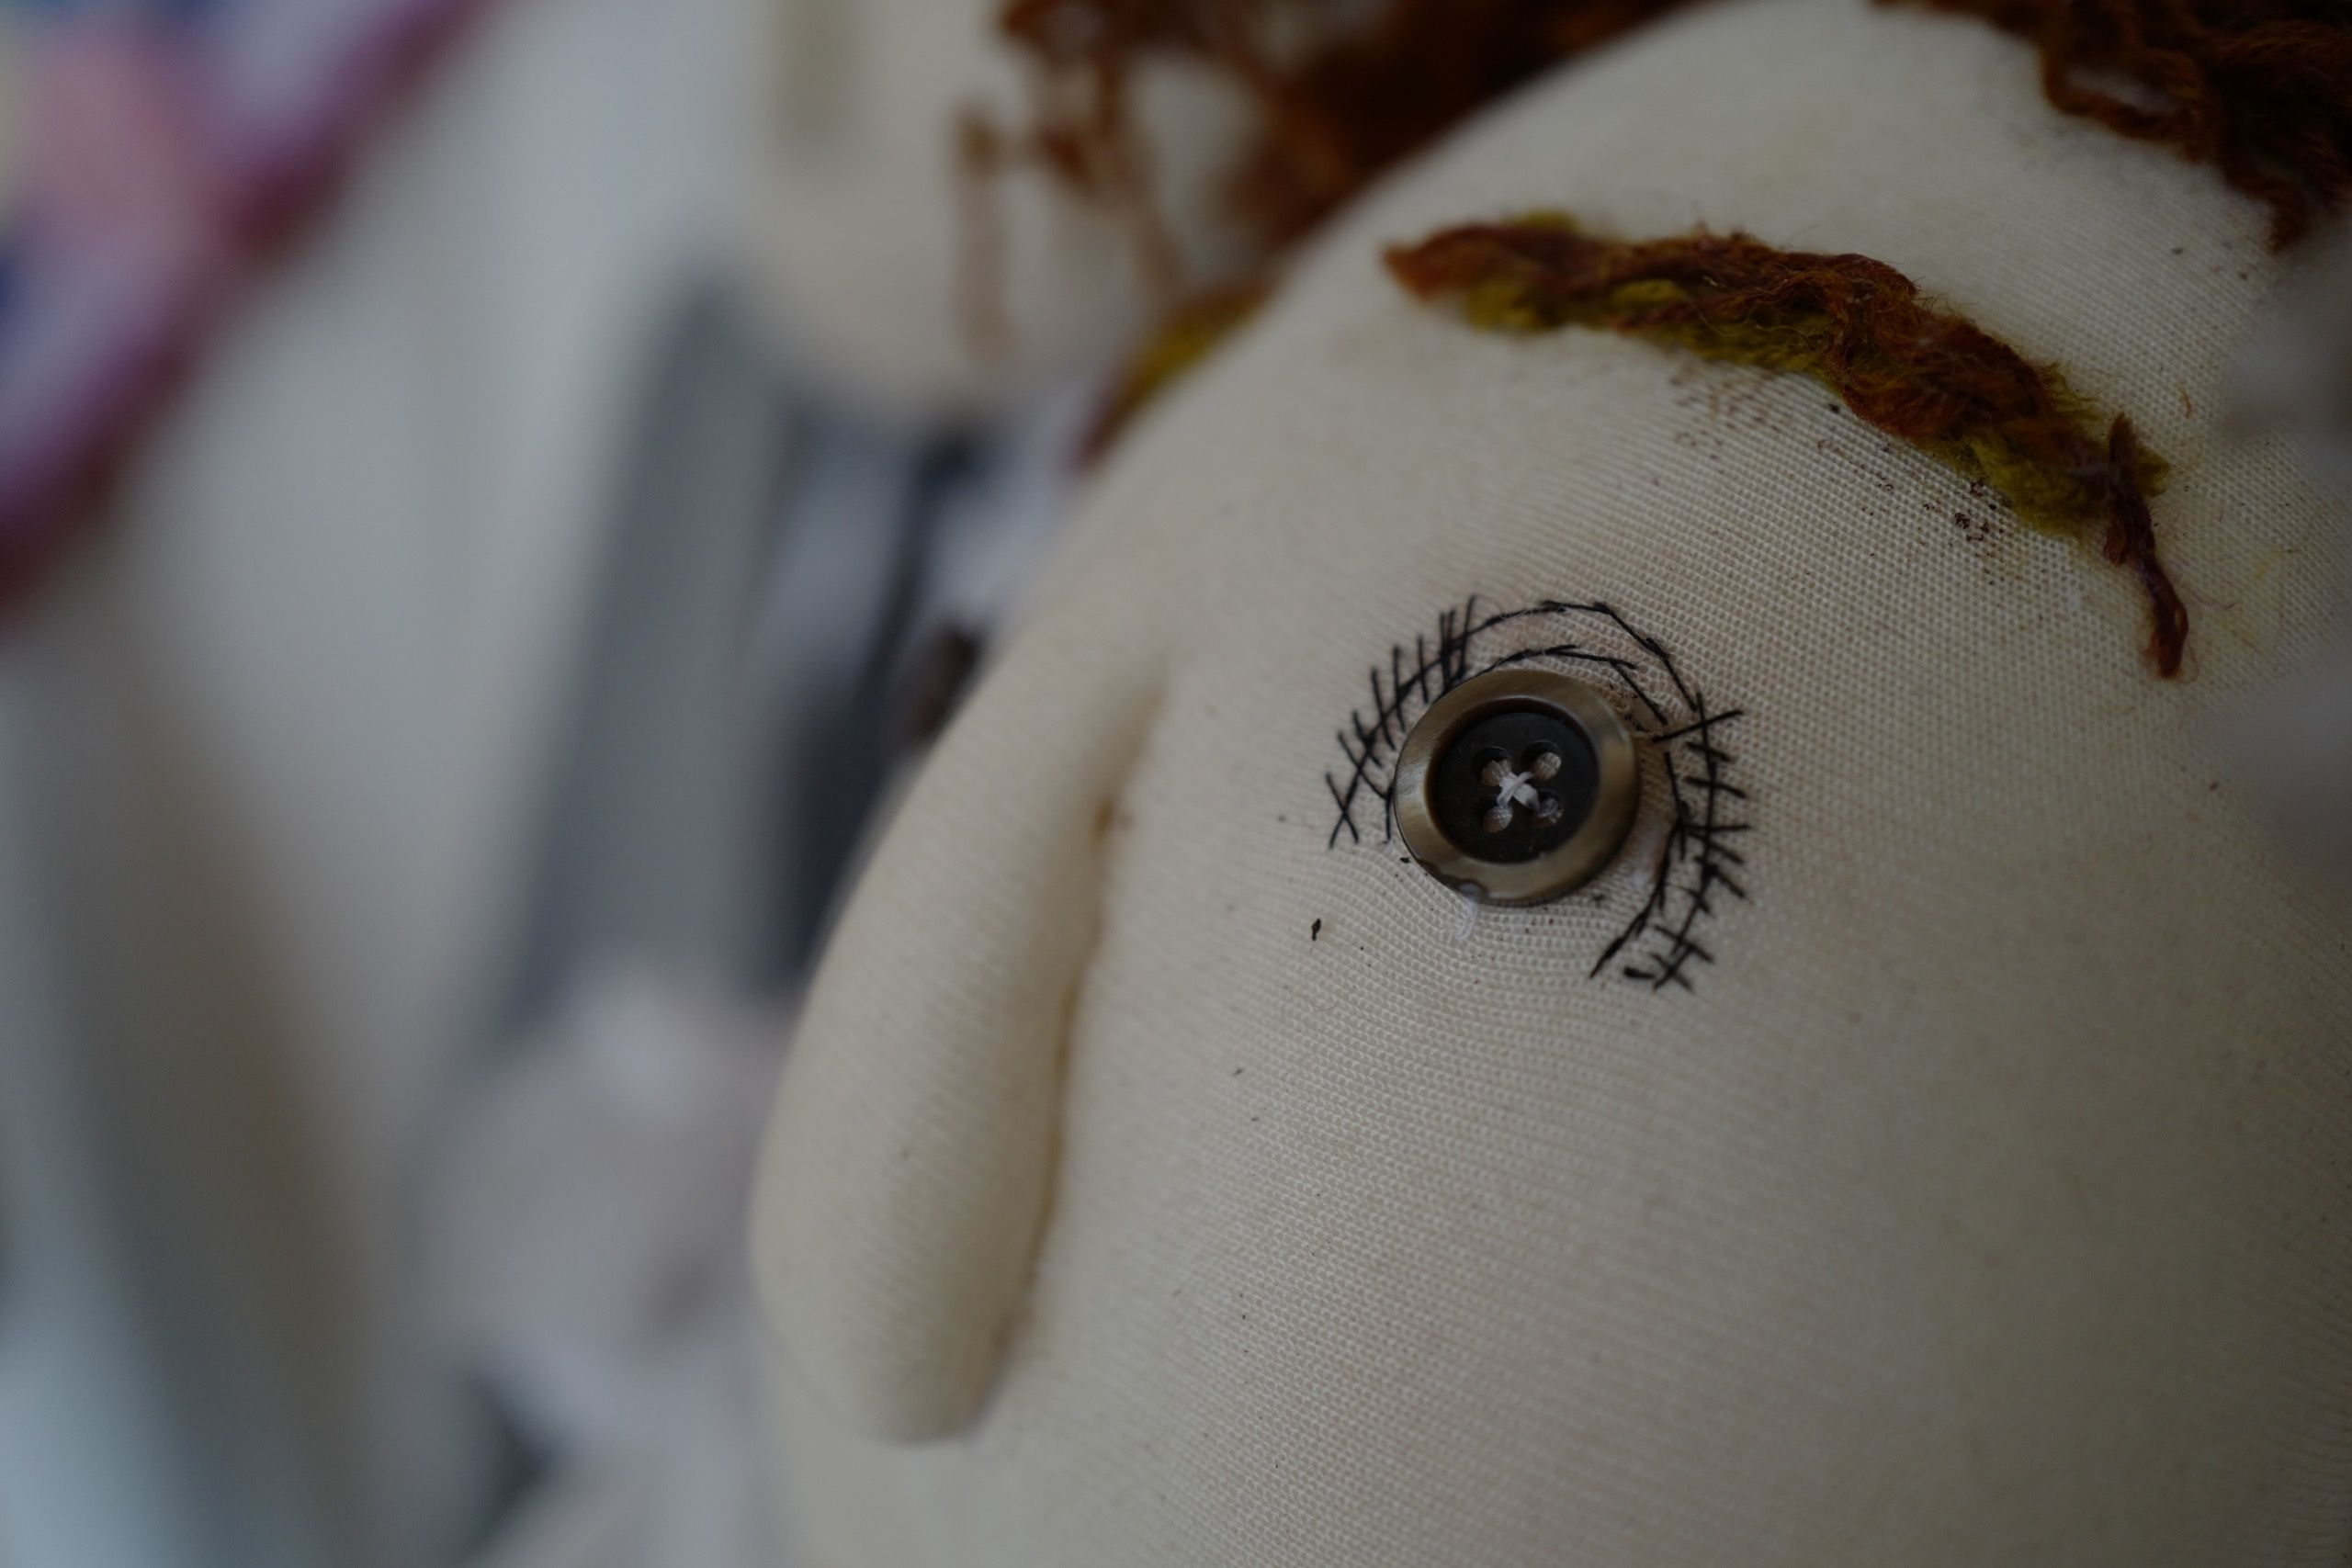 A closeup of the eye, made of a button, of a similar dolls.